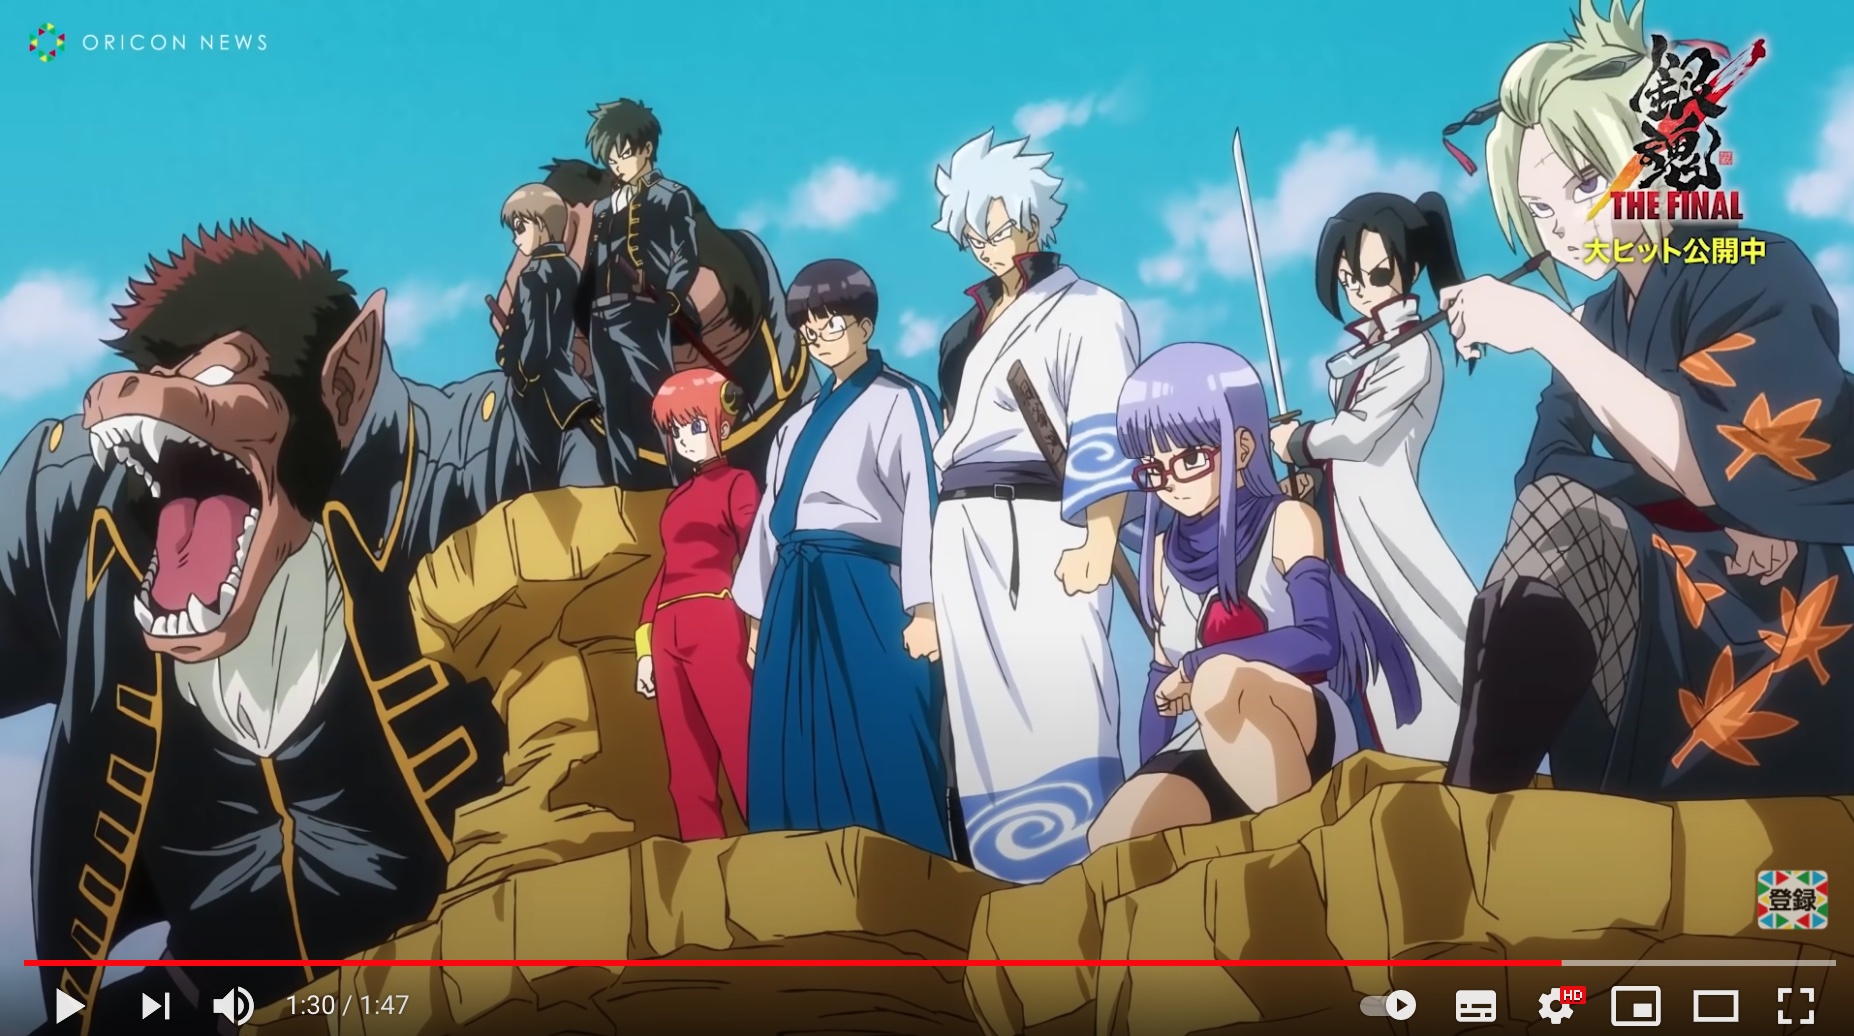 Trailer For New Gintama Movie Pays Homage To Another Famous Anime Series Video Soranews24 Japan News